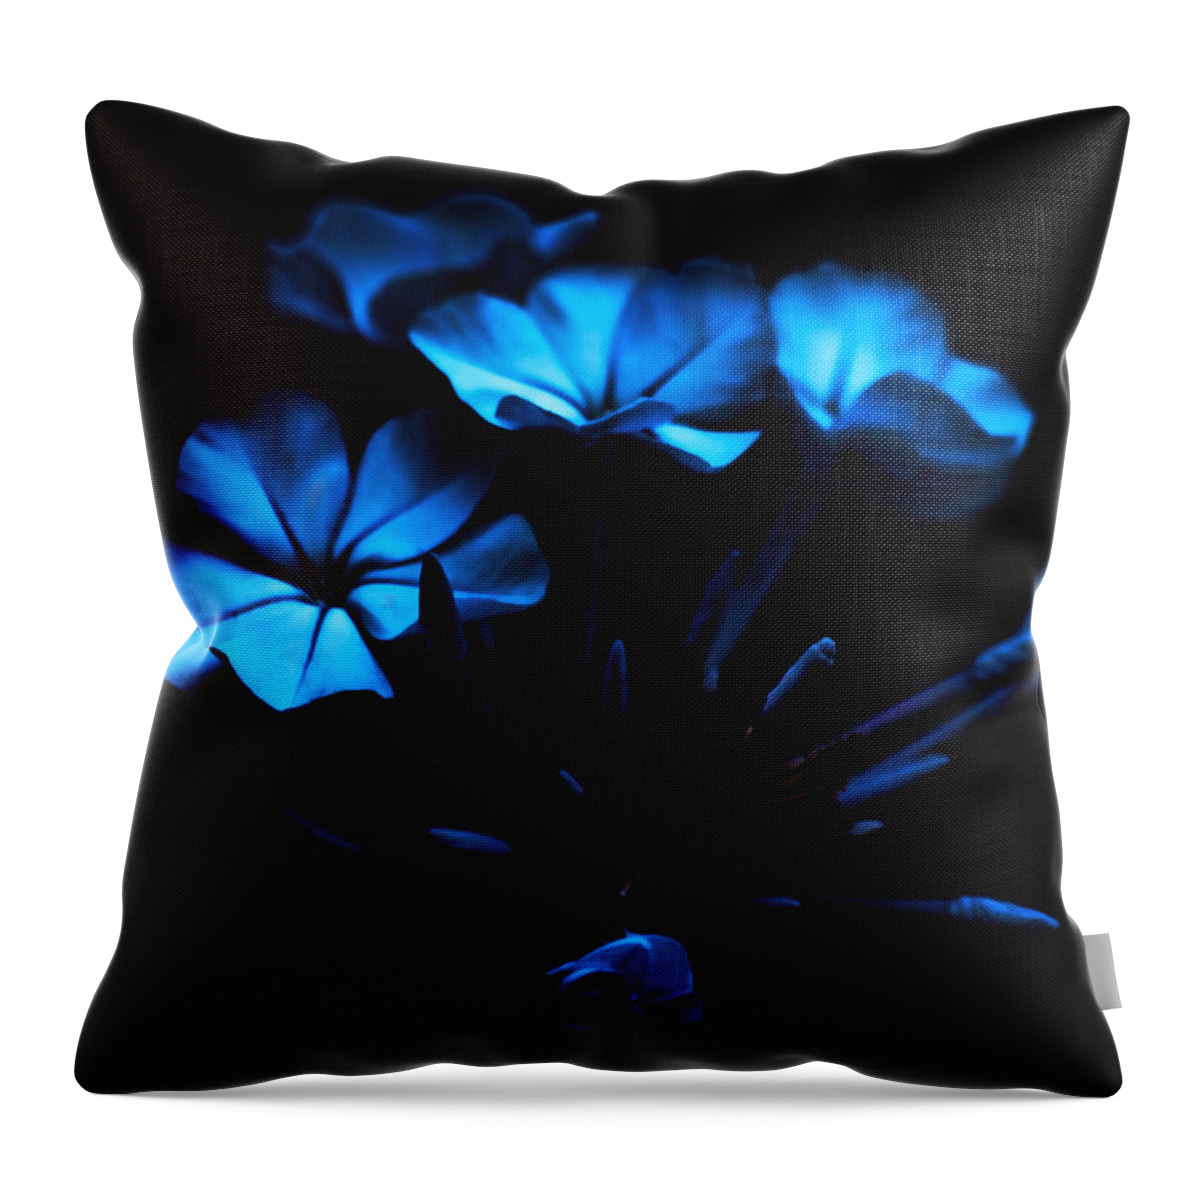 Blue Throw Pillow featuring the photograph Nocturnal Blue by Camille Lopez